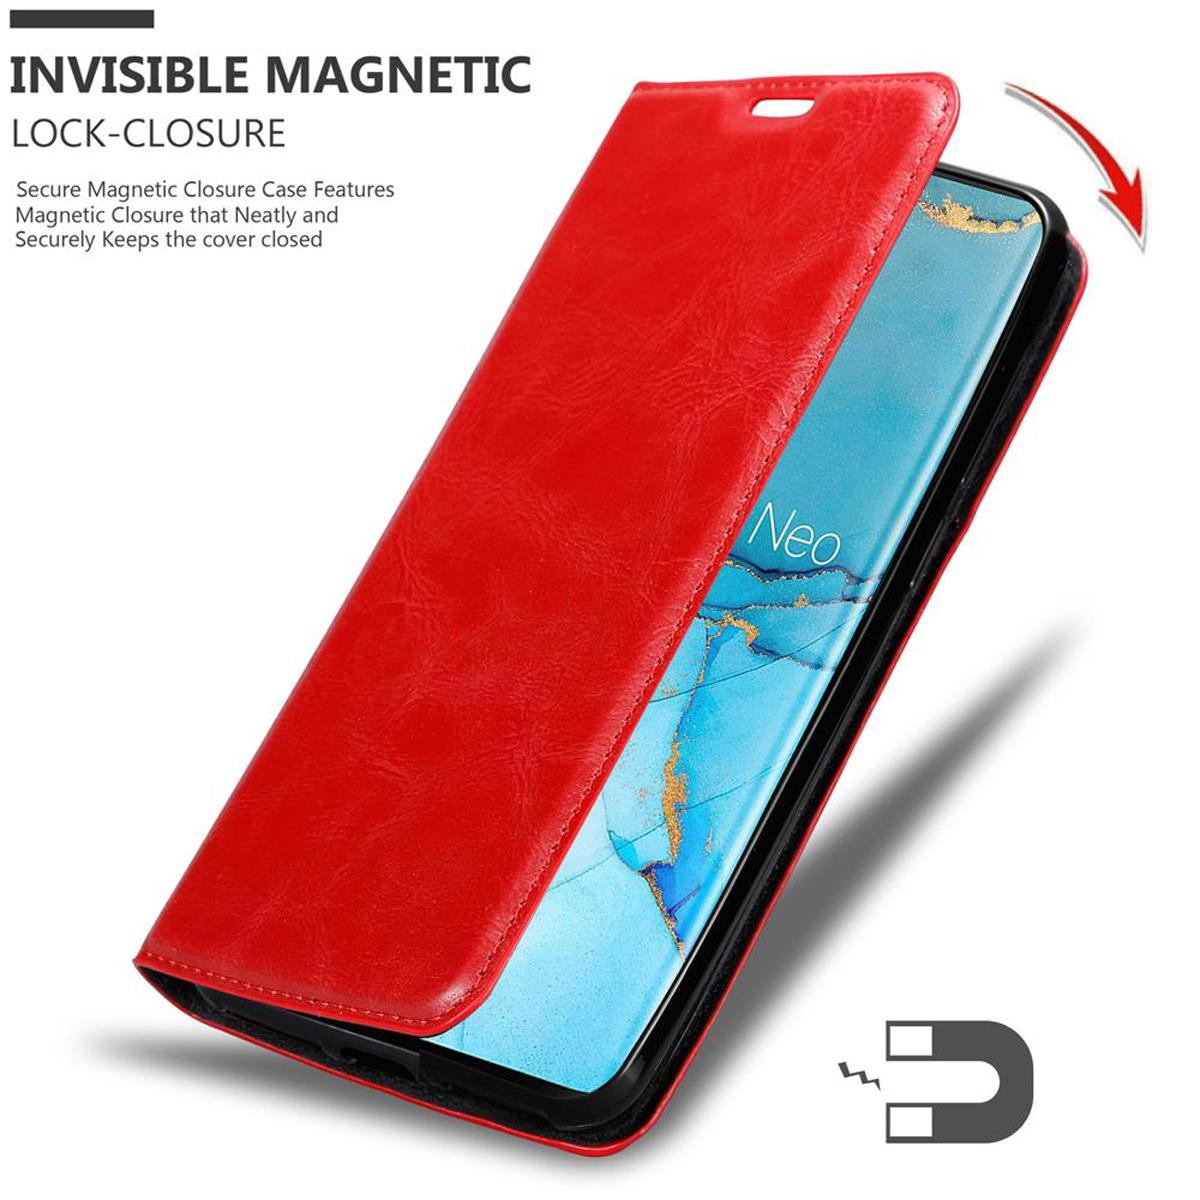 Book Bookcover, Magnet, Hülle PRO, Invisible CADORABO APFEL X2 ROT FIND Oppo,